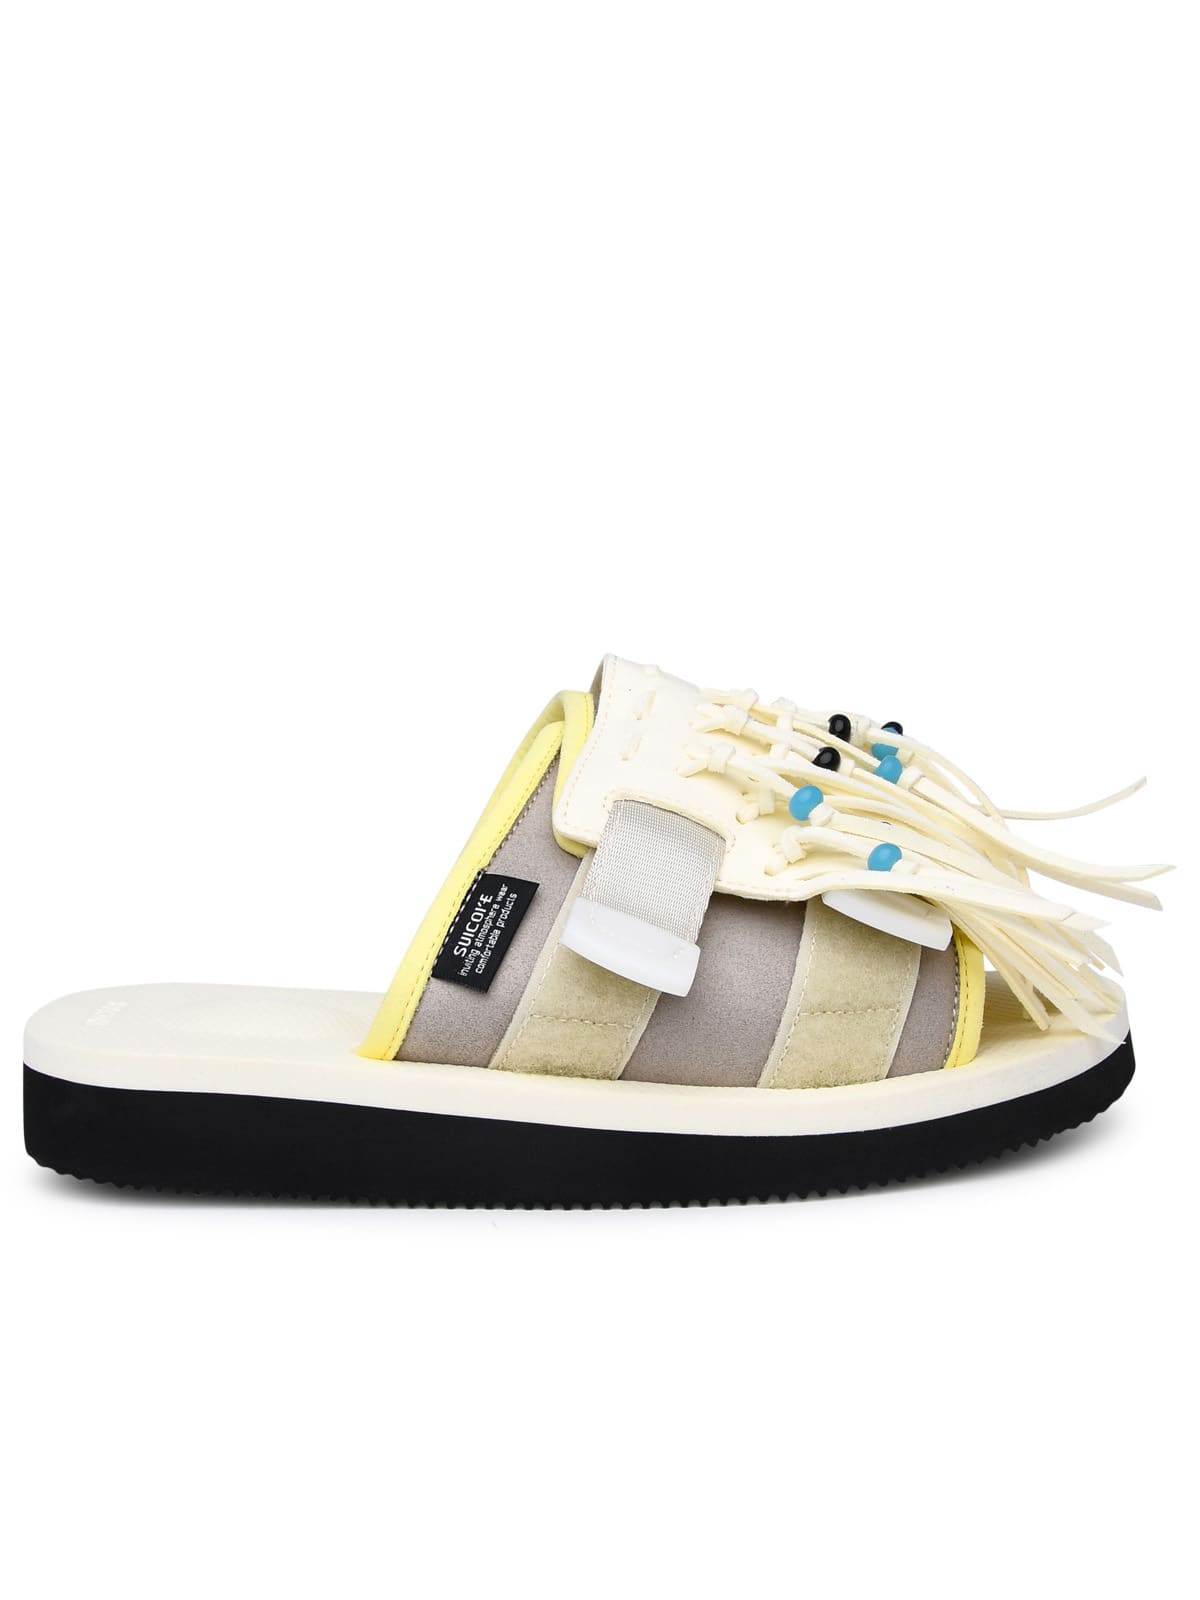 Shop Suicoke Hoto Cab Slipper In Ivory Synthetic Leather In White